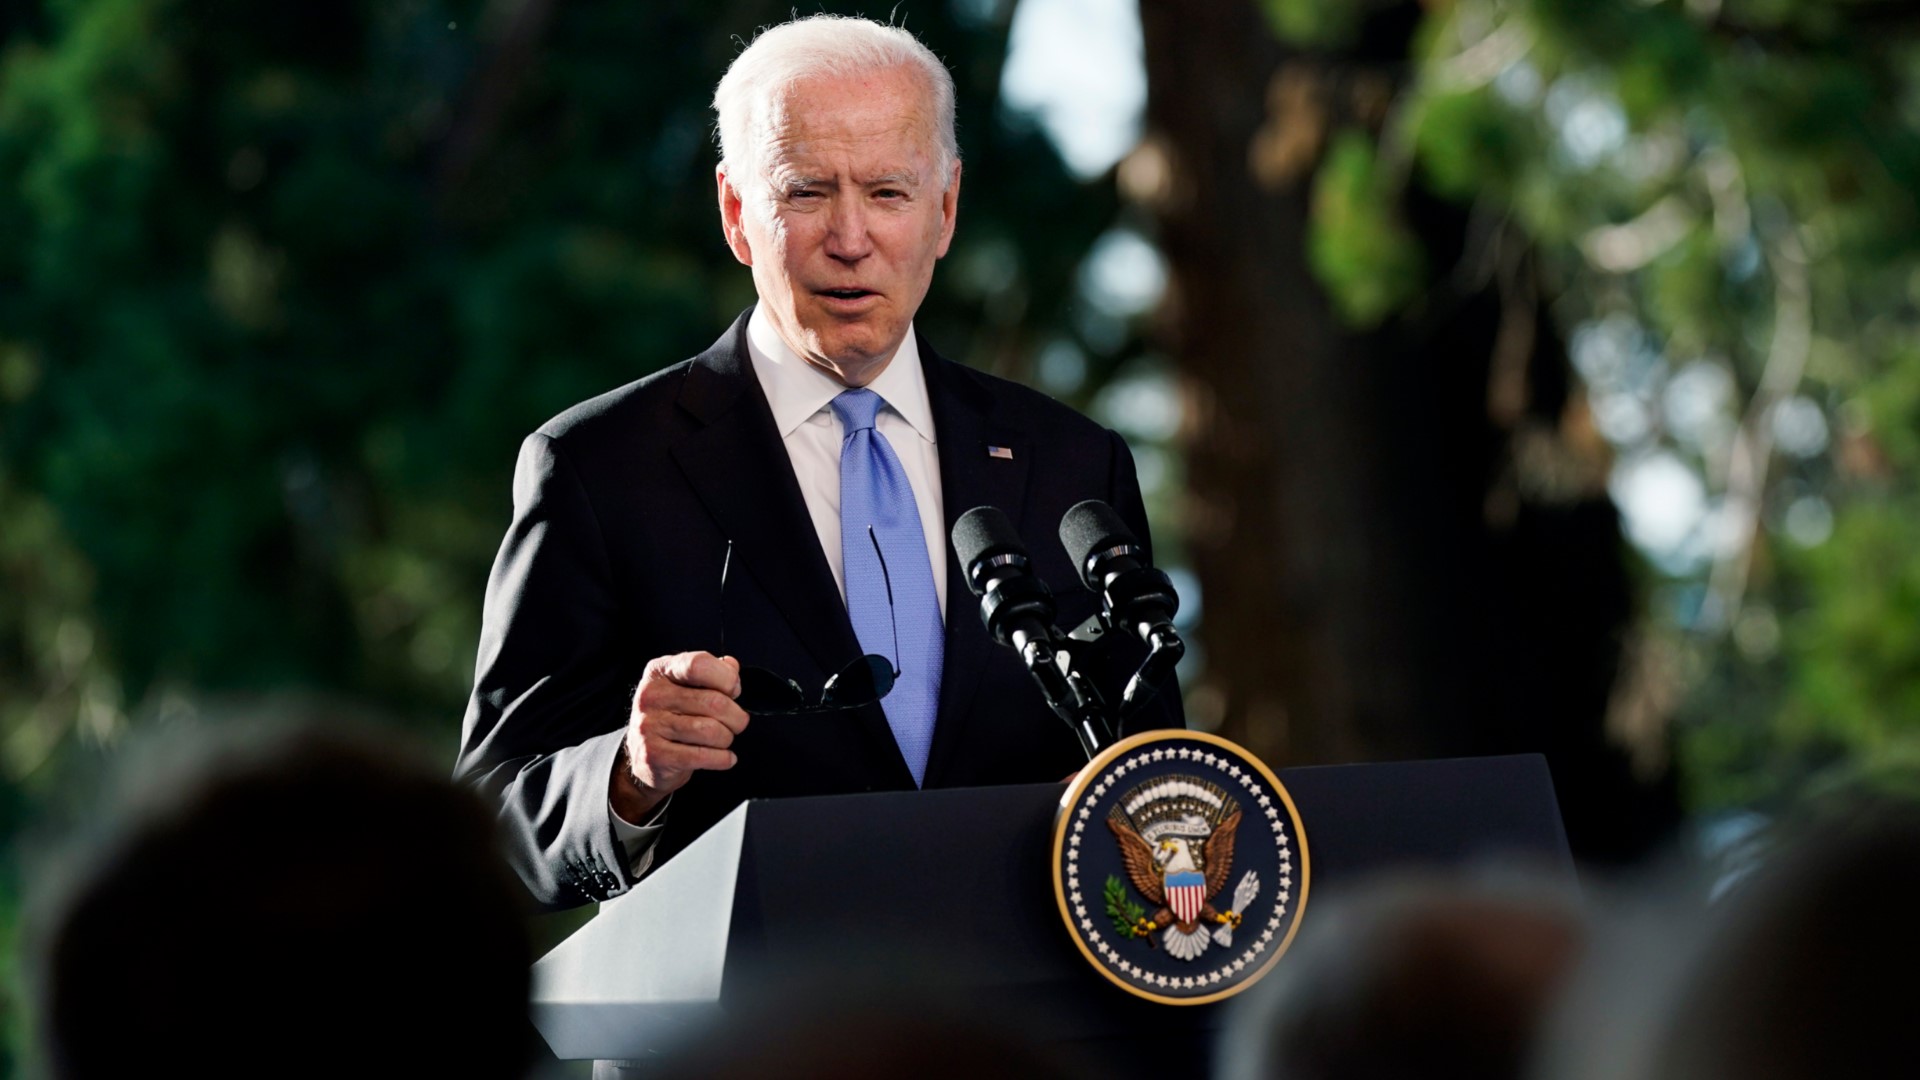 The VERIFY Team looked into the number of executive orders issued by past administrations in their first week to see how the 22 issued by President Biden compare.